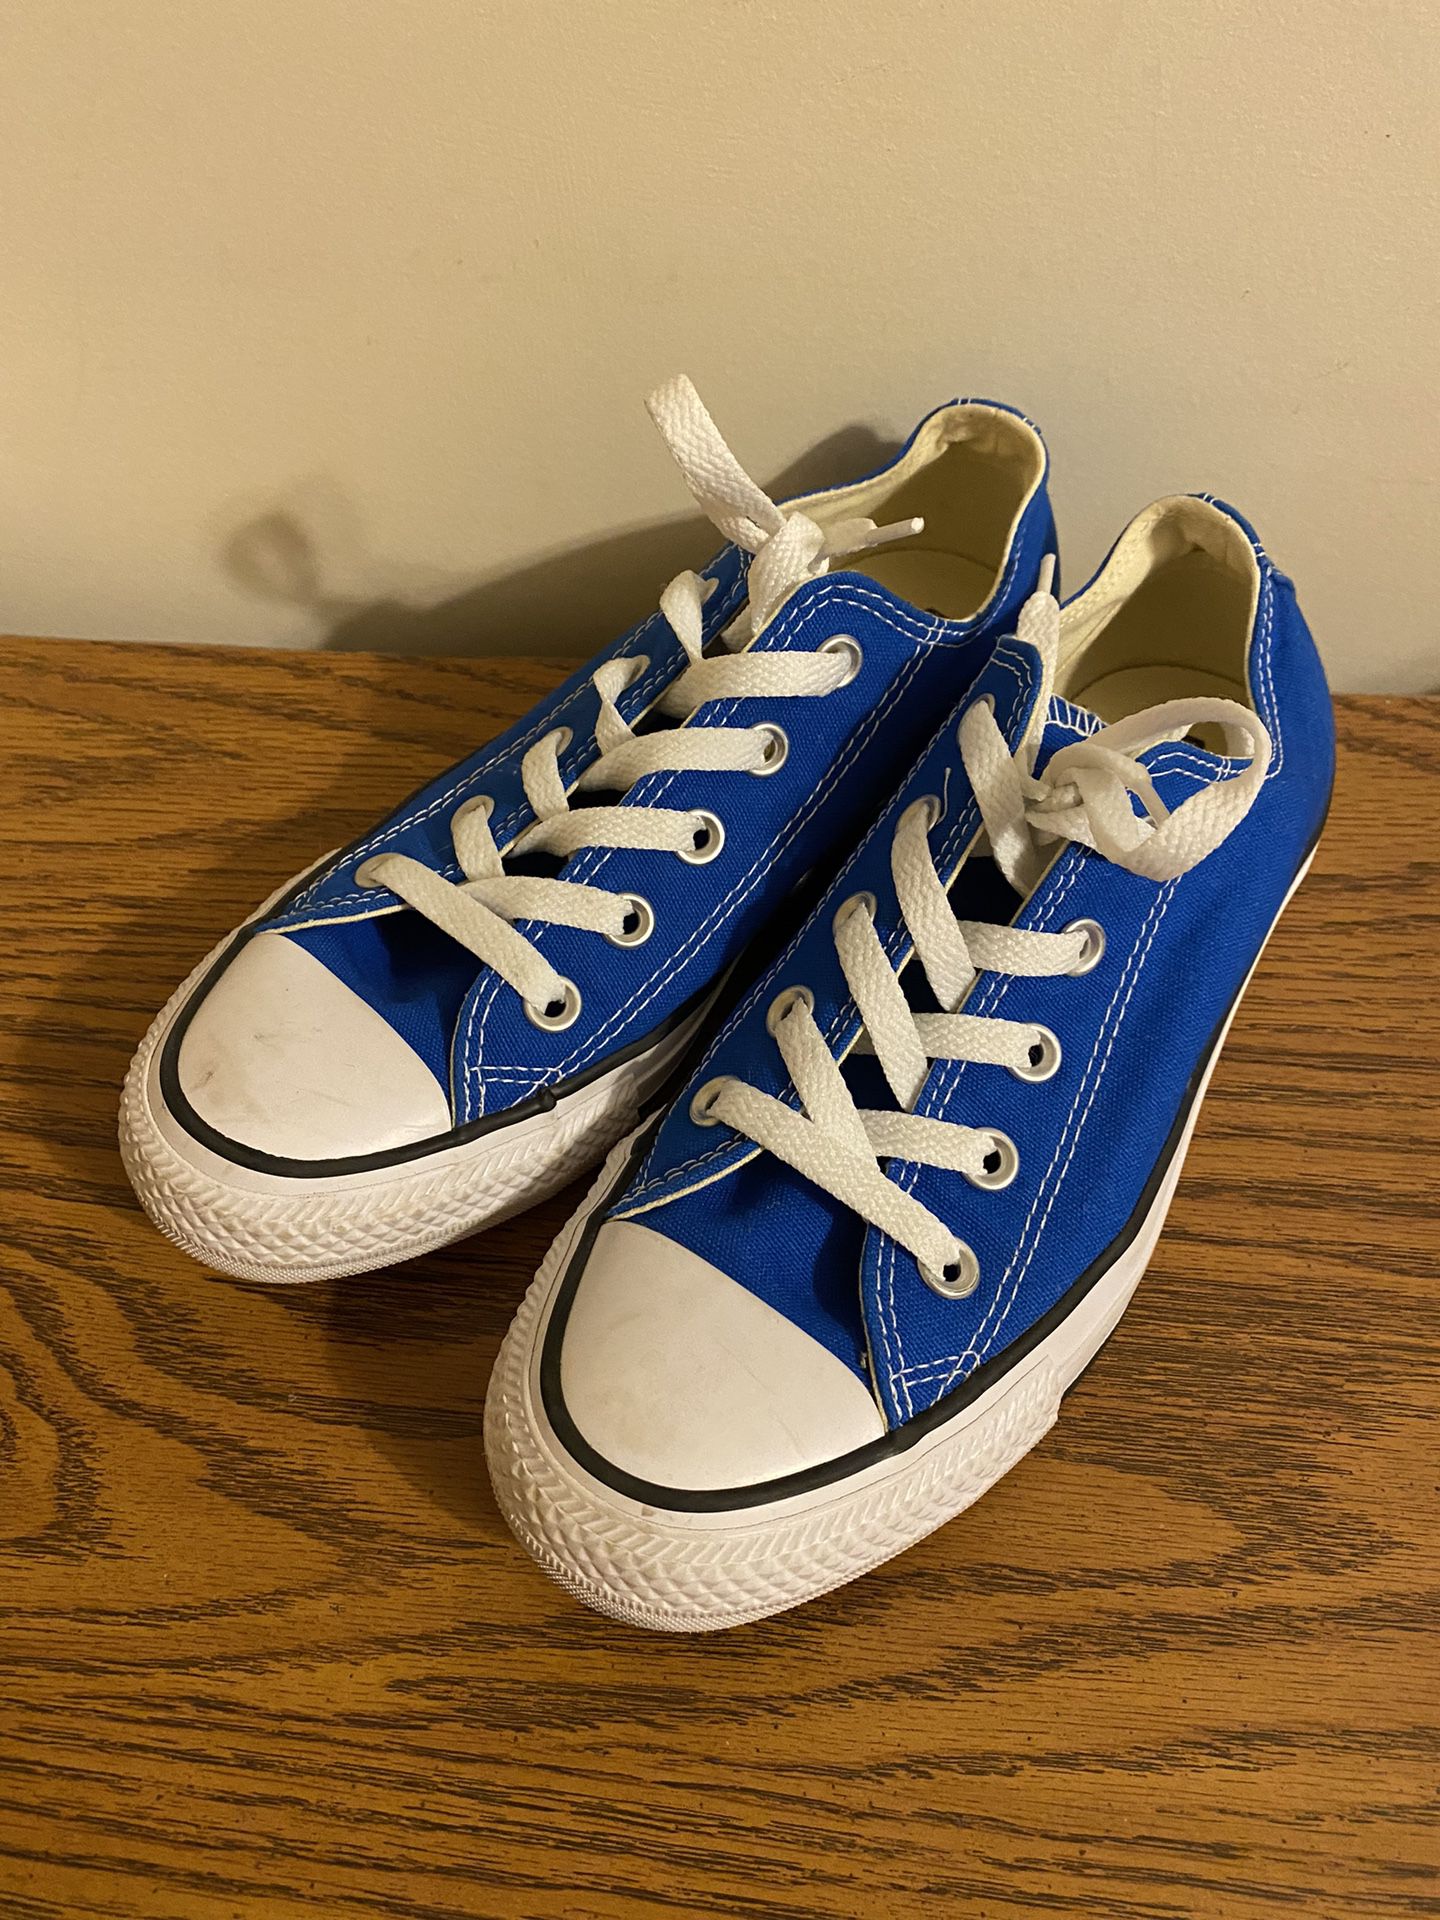 New Converse All Star Sneakers Women Size 6 Men Size 4 